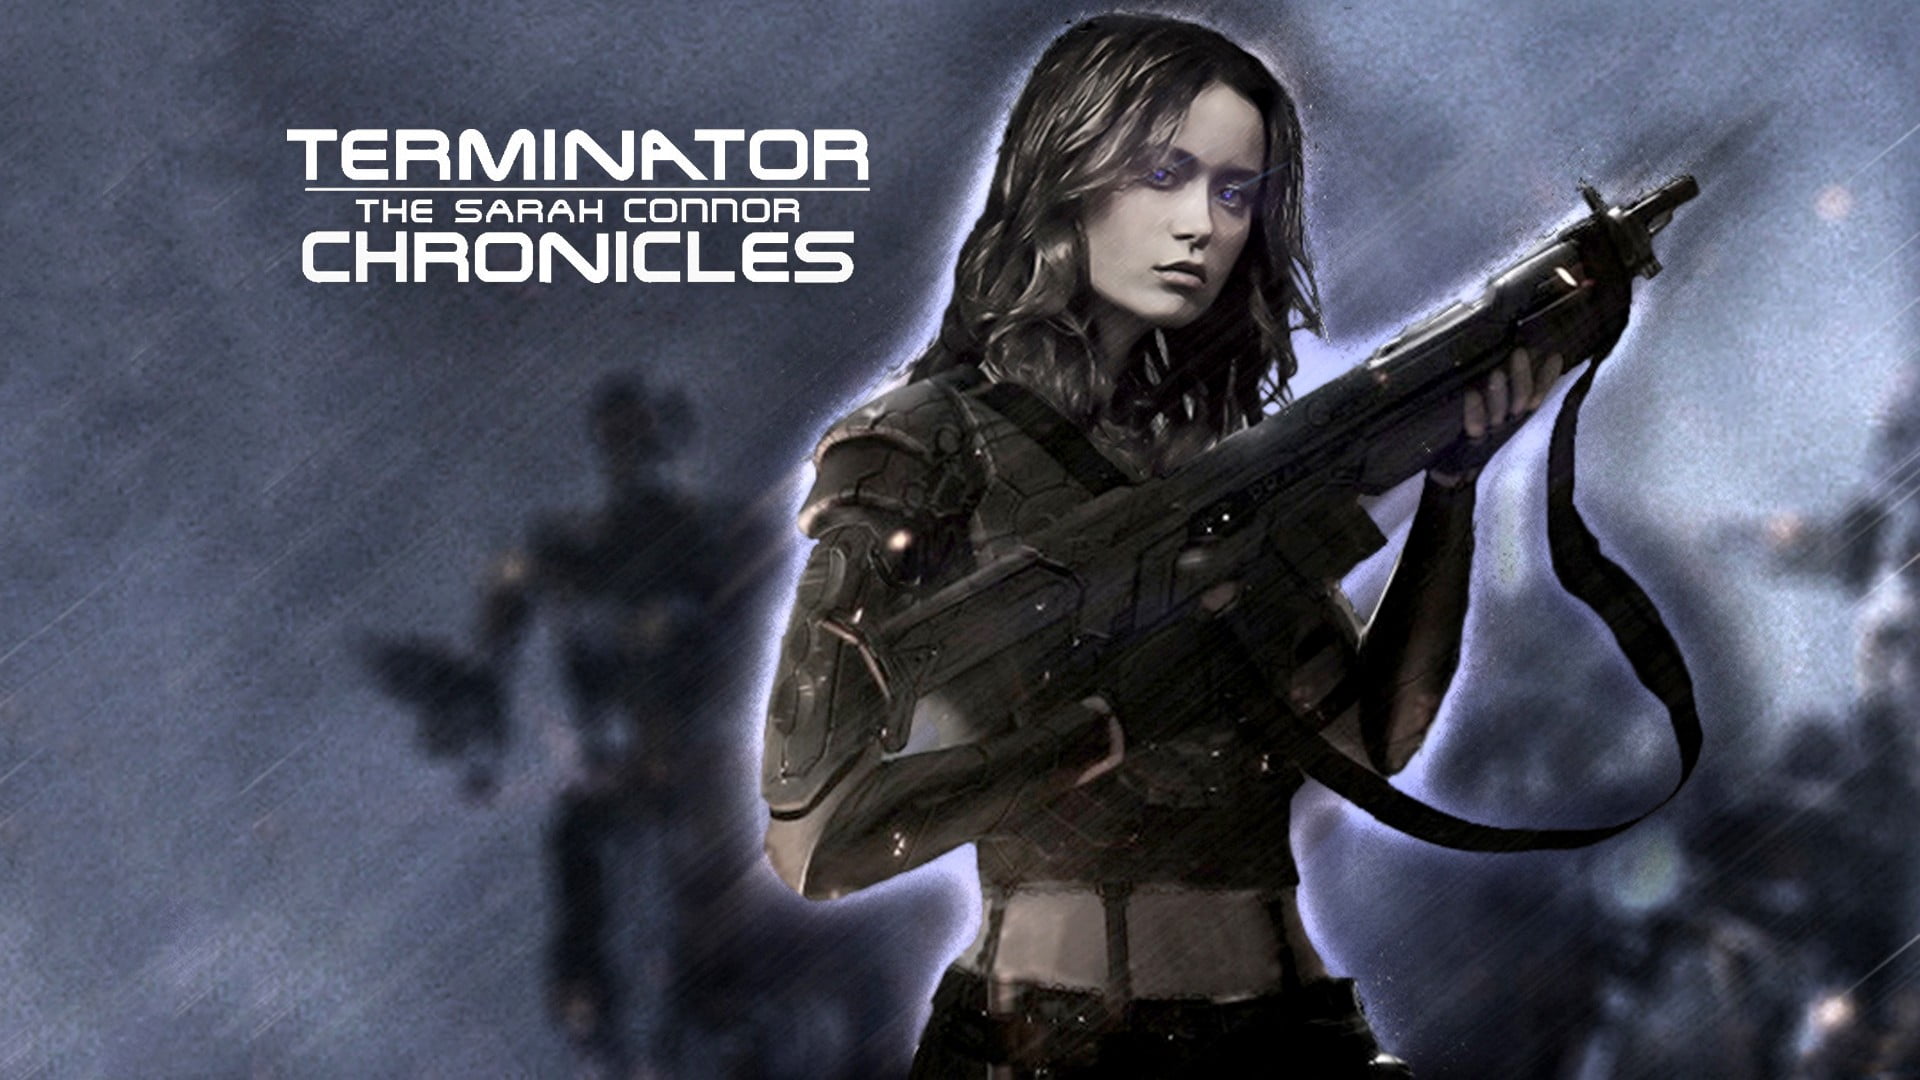 Terminator The Sarah Connor Chronicles game poster, Terminator Sarah Connor Chronicles